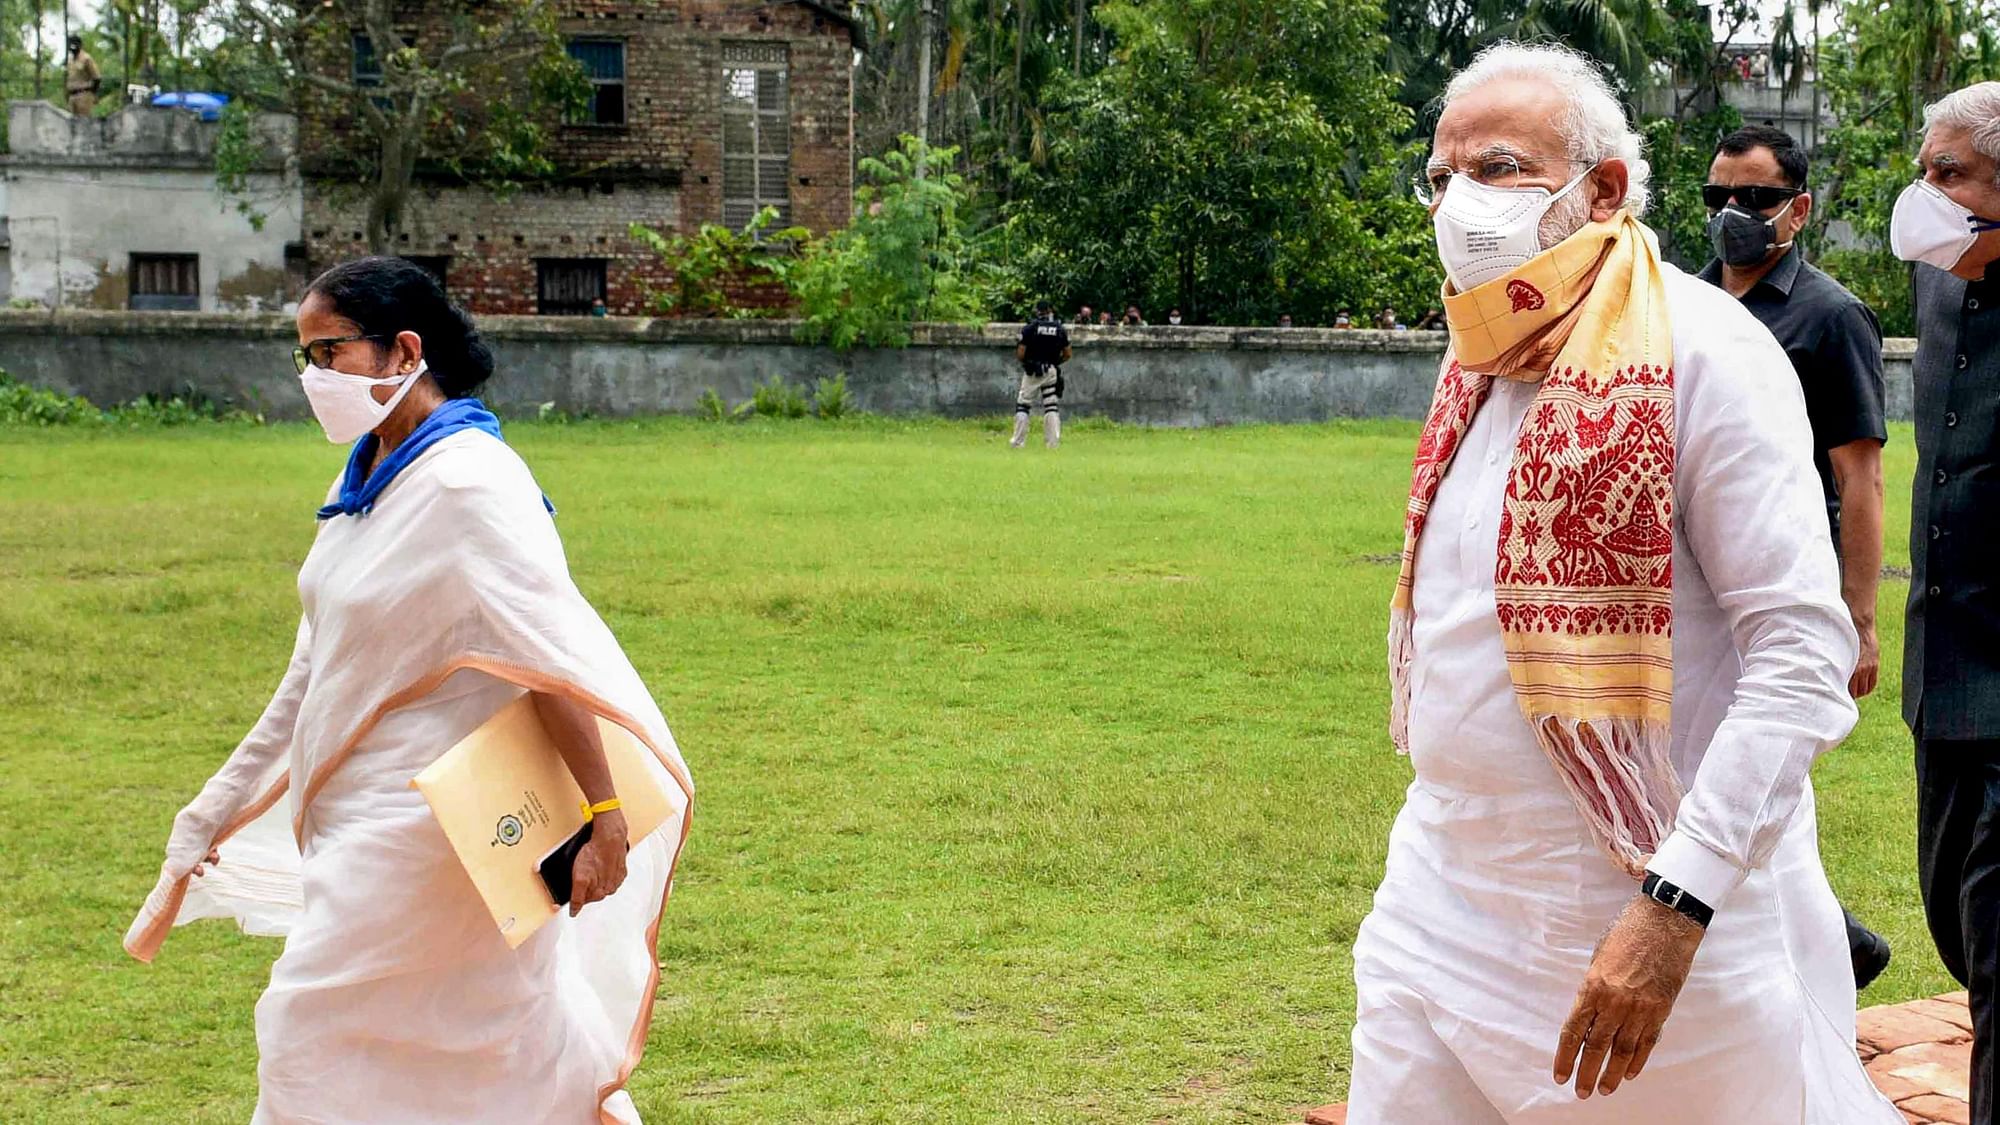 Prime Minister Narendra Modi and West Bengal Chief Minister Mamata Banerjee in Kolkata after aerial survey of devastation caused by Amphan cyclone earlier in 2020.